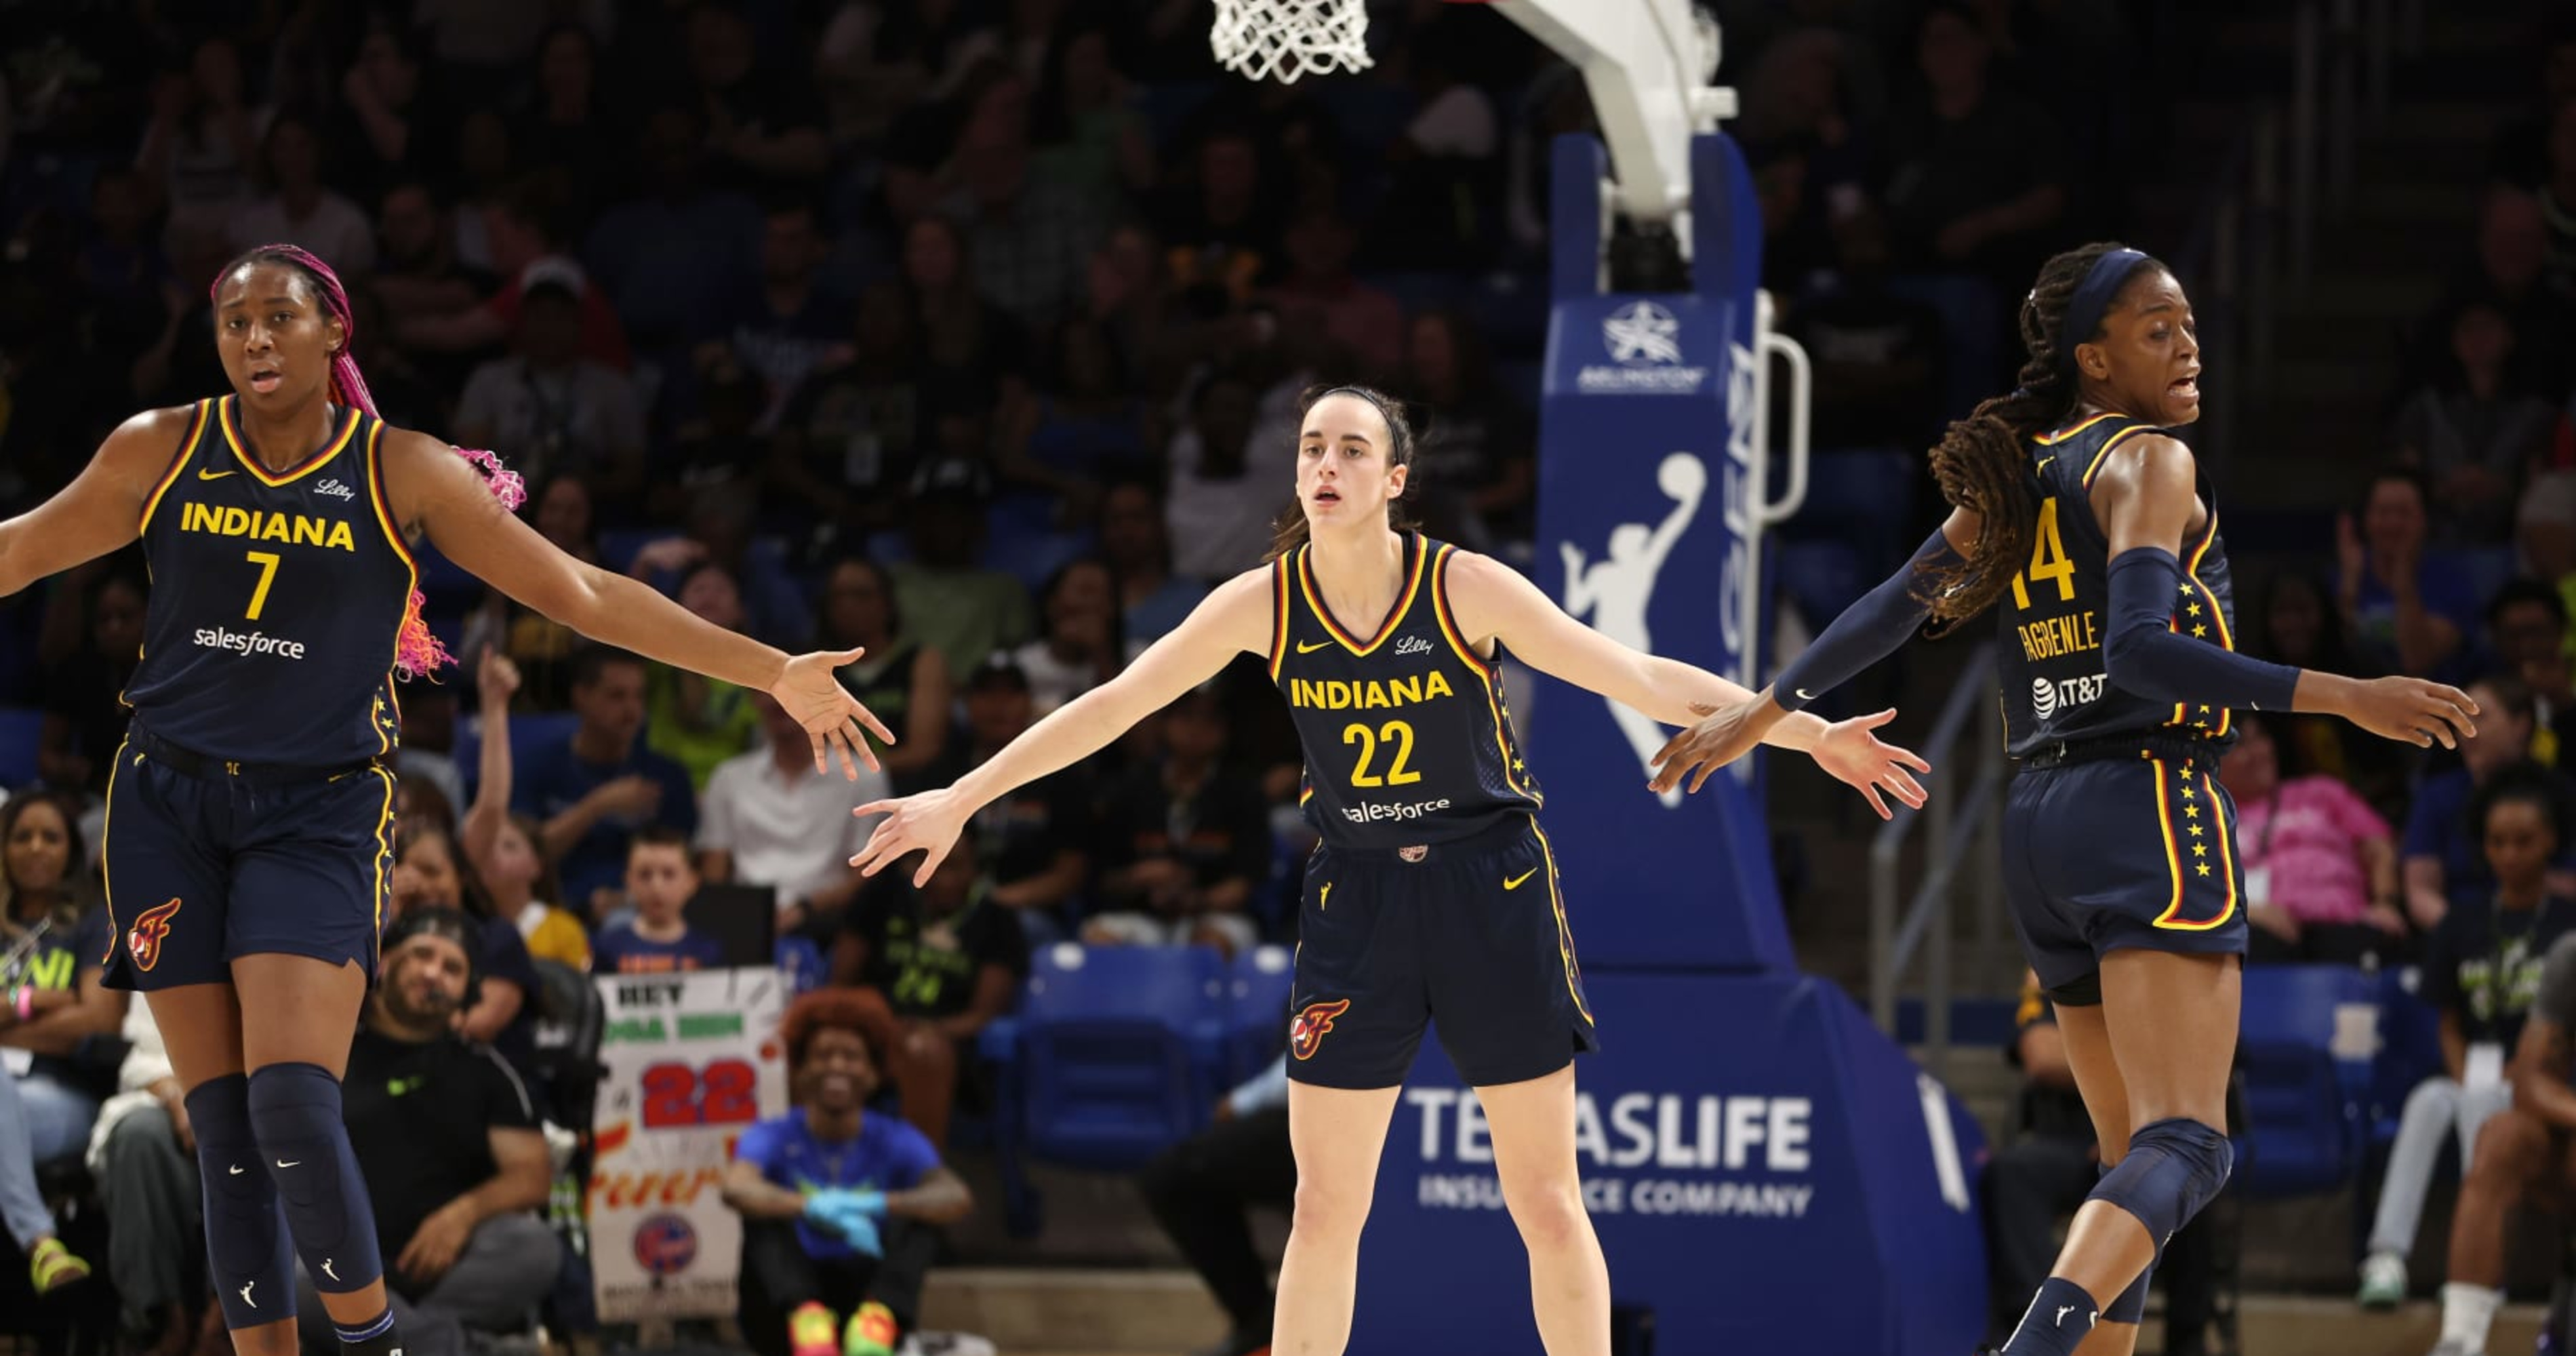 WNBA's Caitlin Clark on Preseason Debut with Fever: Great Atmosphere for Women's Game